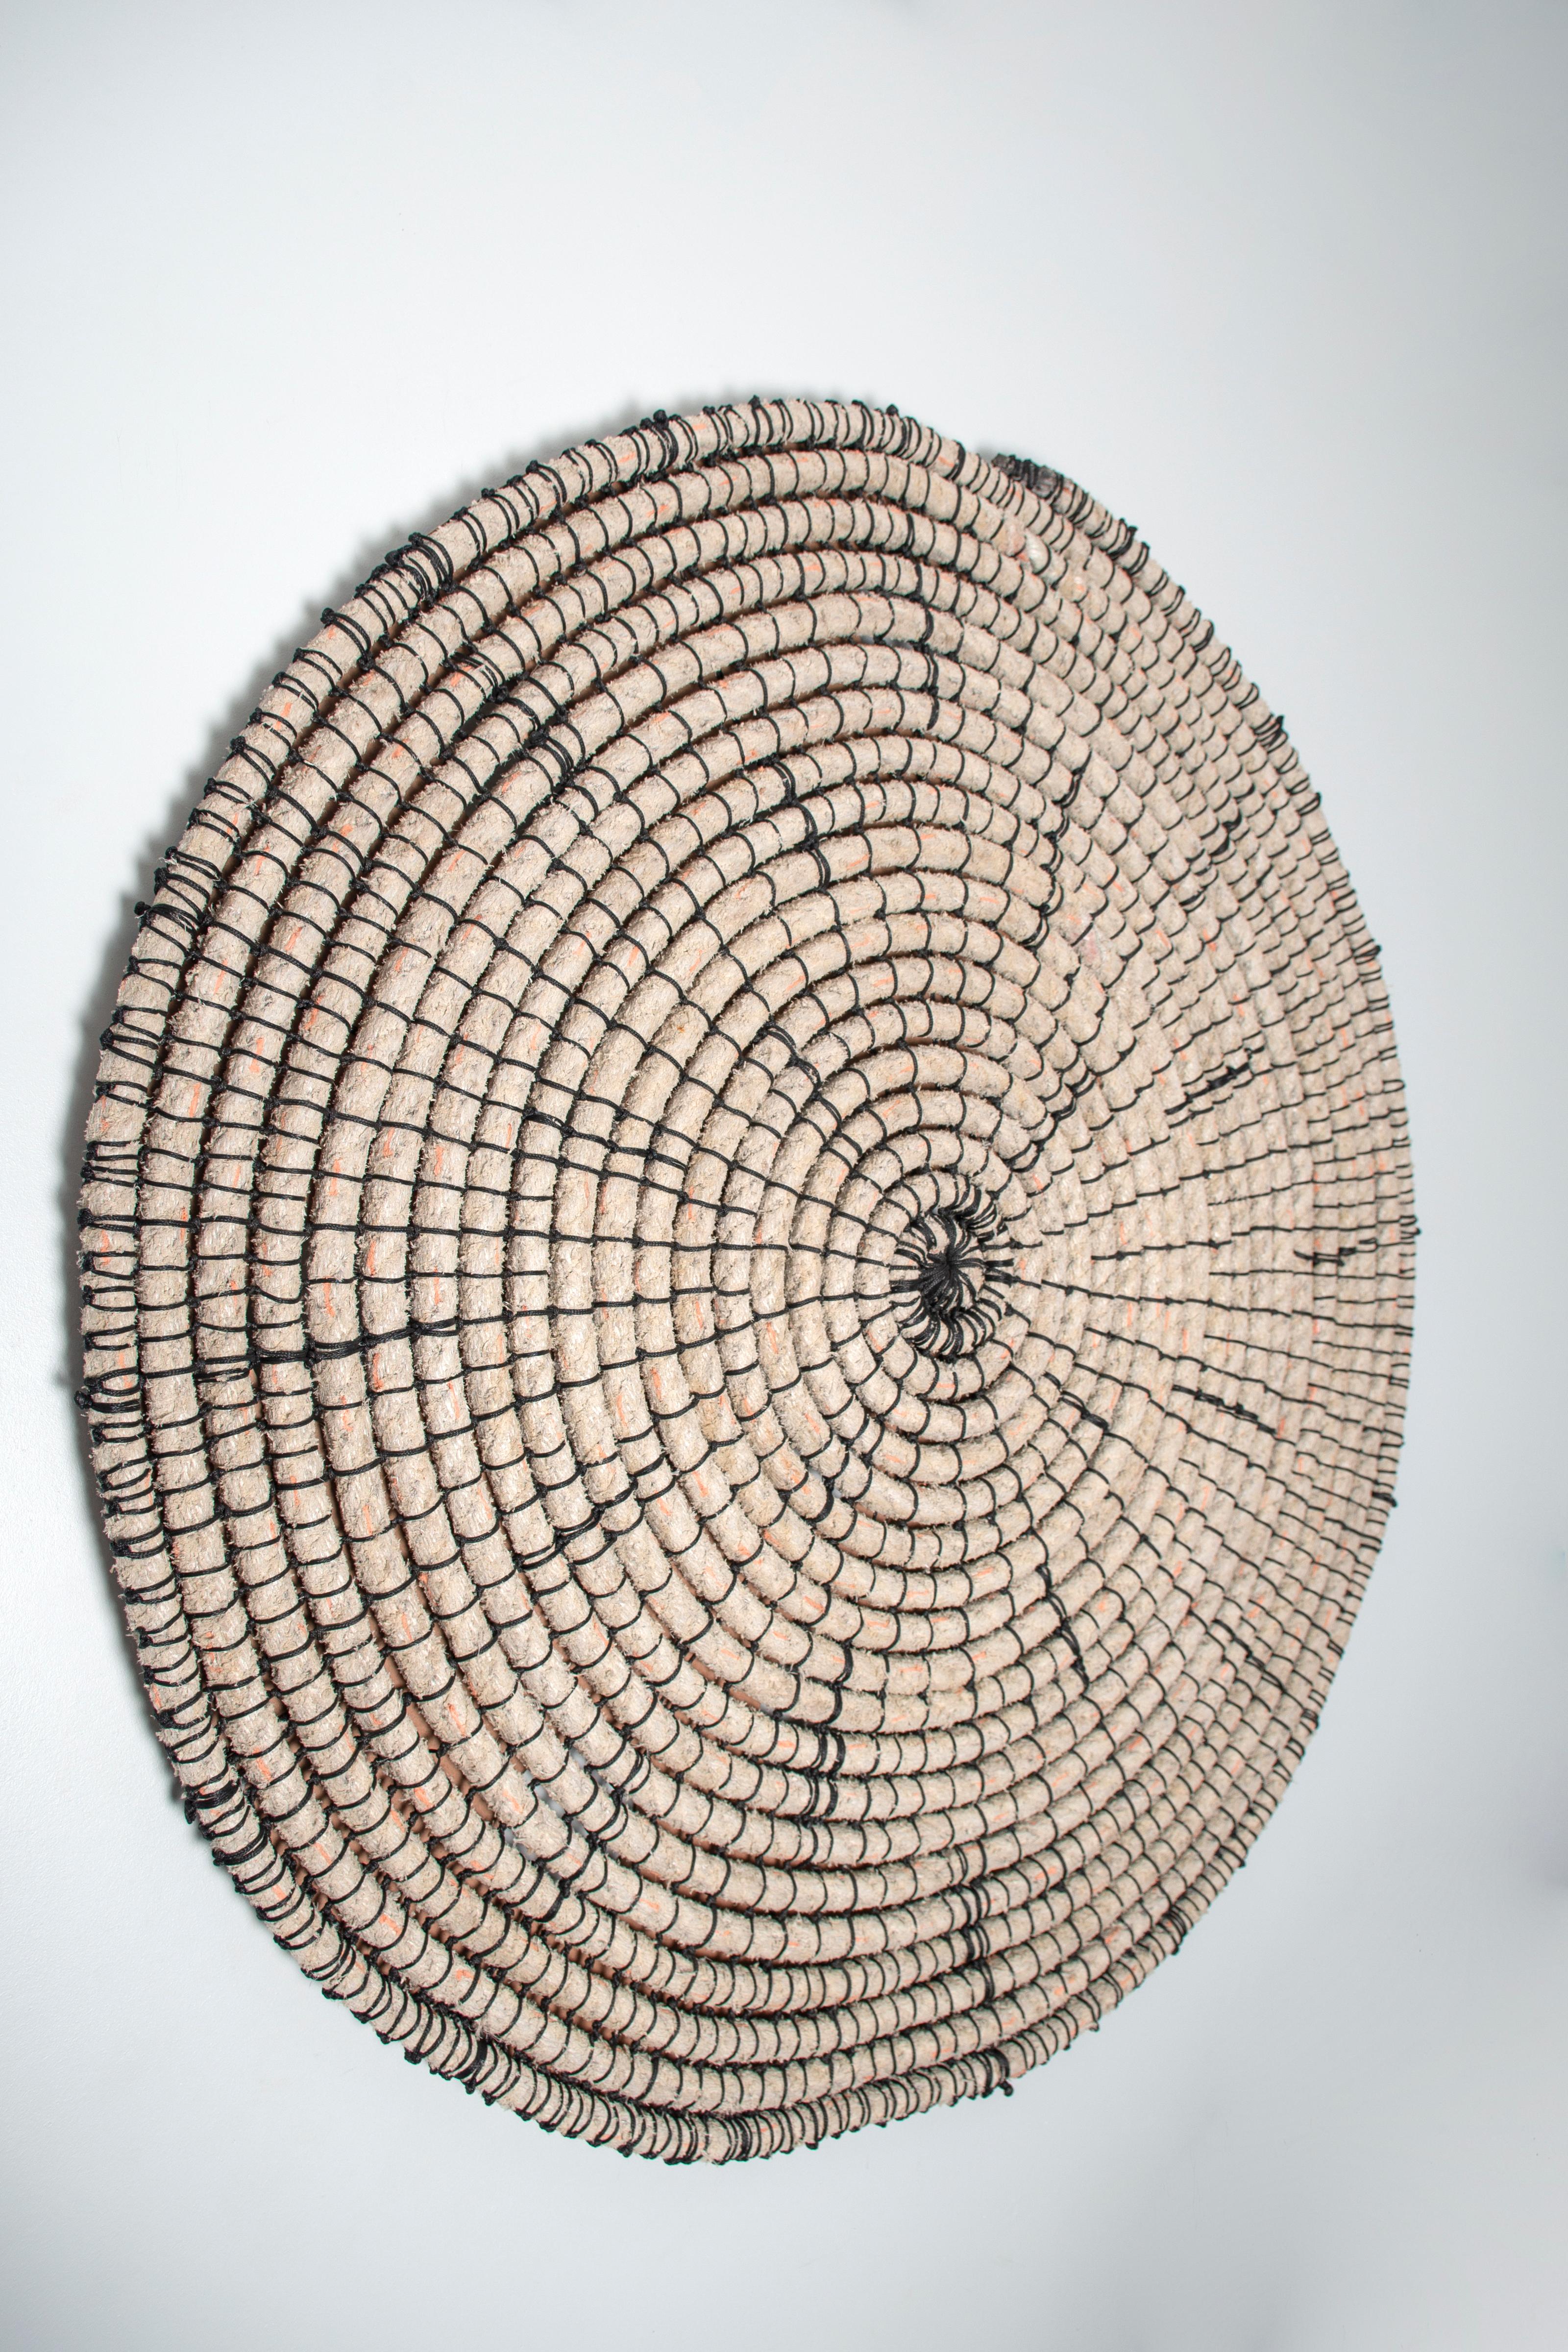 Baskets reimagined 1, 2020. Mixed media: nautical rope and acryclic string

‘Baskets reimagined’ are a series of delicate but visceral wall hangings that are inspired by traditional Ovakwanyama basket weaving. Like Mbangula’s hand-dyed and repeat